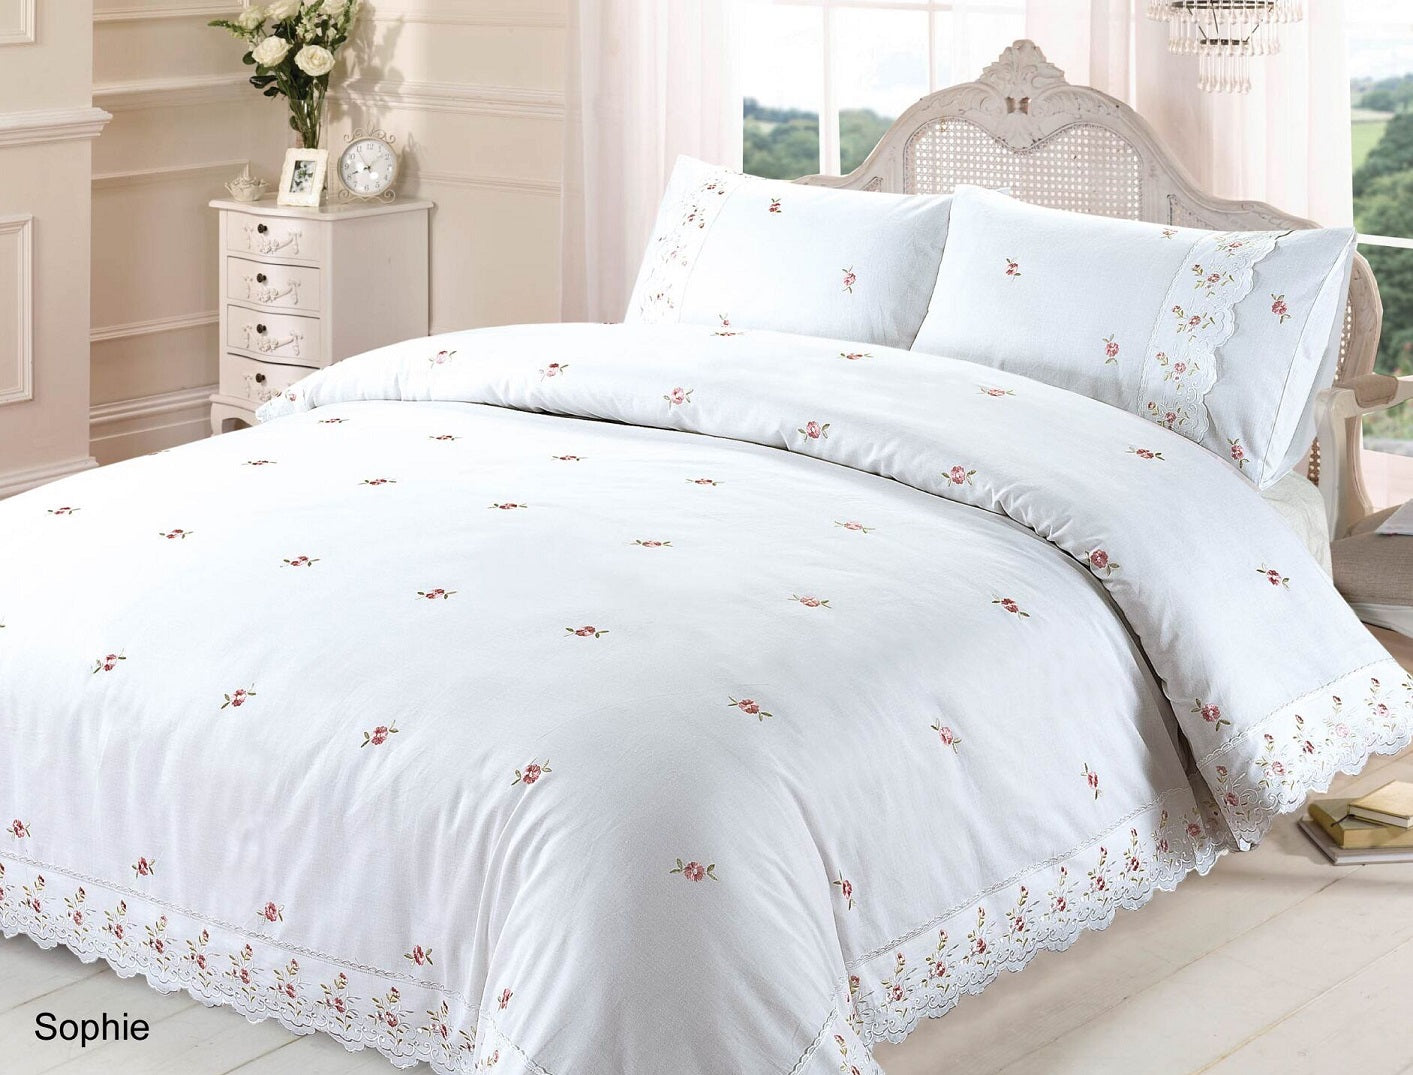 Shabby Chic Embroidered Lace Trim Duvet Cover, Double, White